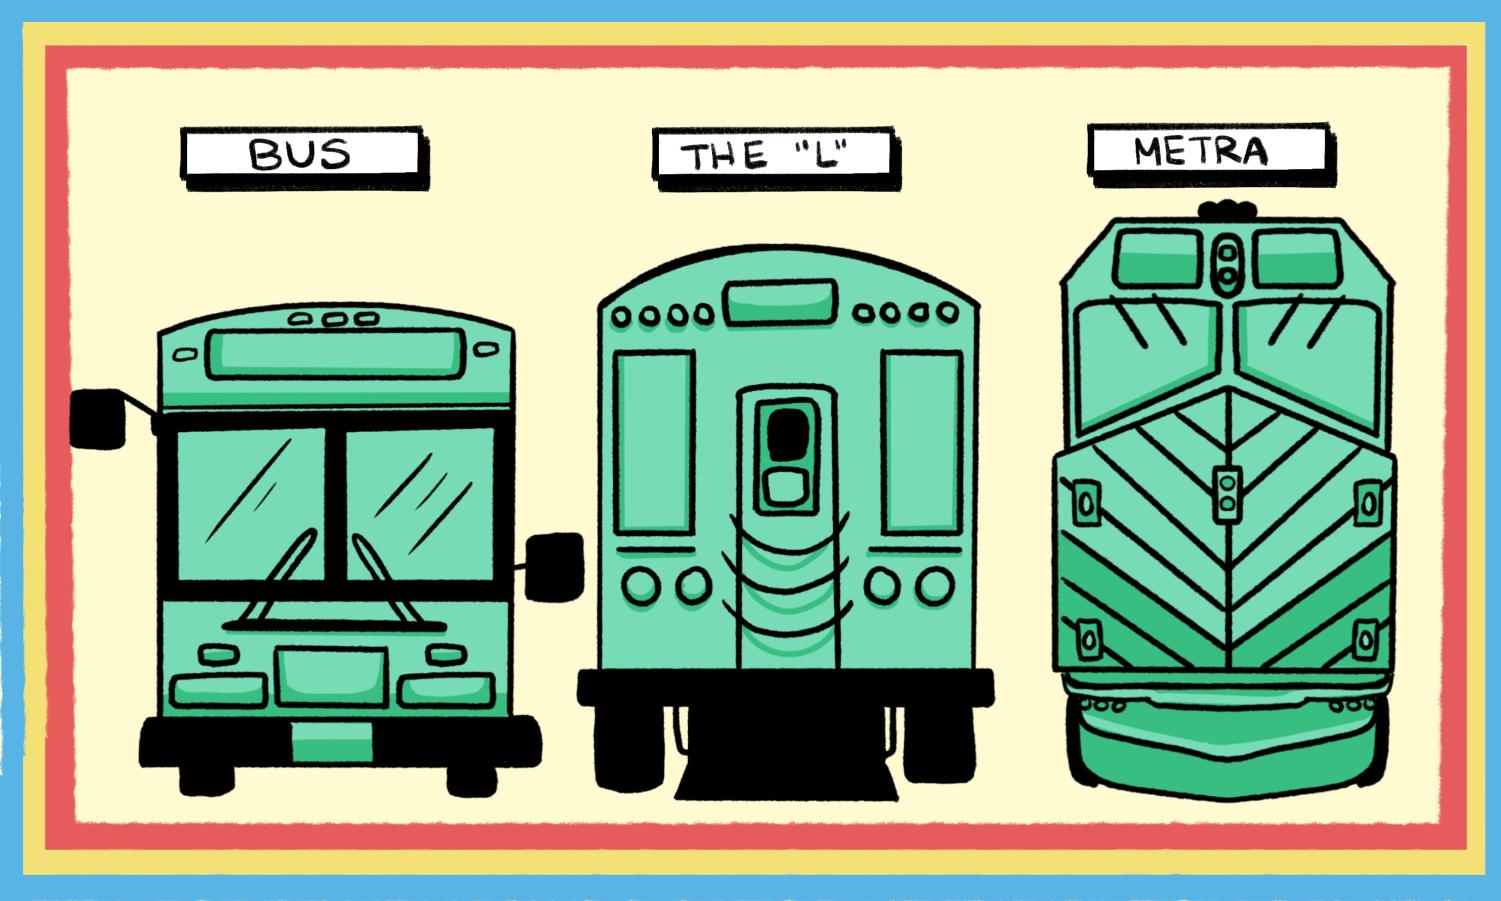 An+illustration+of+a+bus%2C+a+CTA+train%2C+and+the+Metra+train.